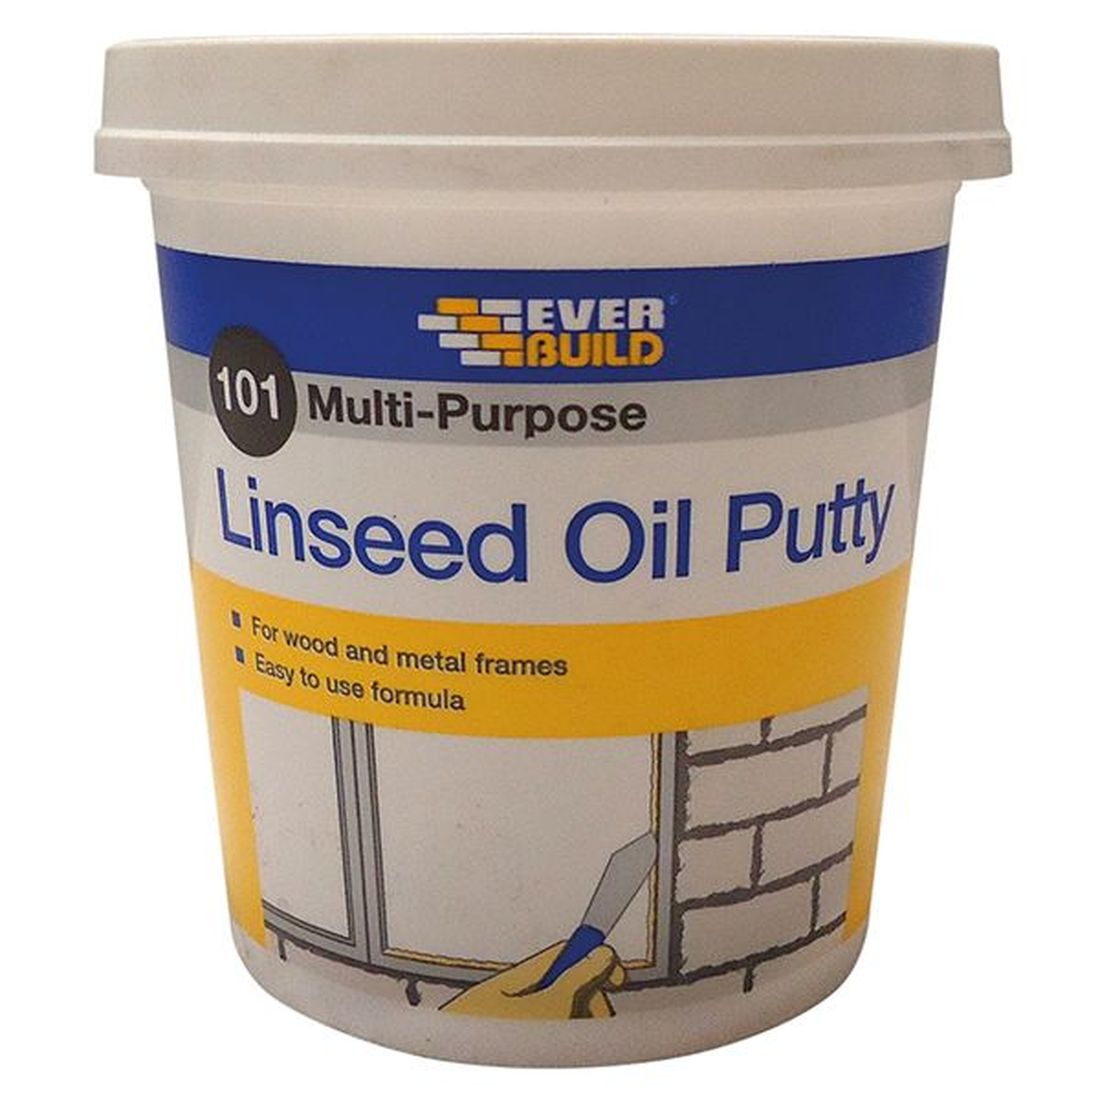 Everbuild 101 Multi-Purpose Linseed Oil Putty Natural 1kg                                 